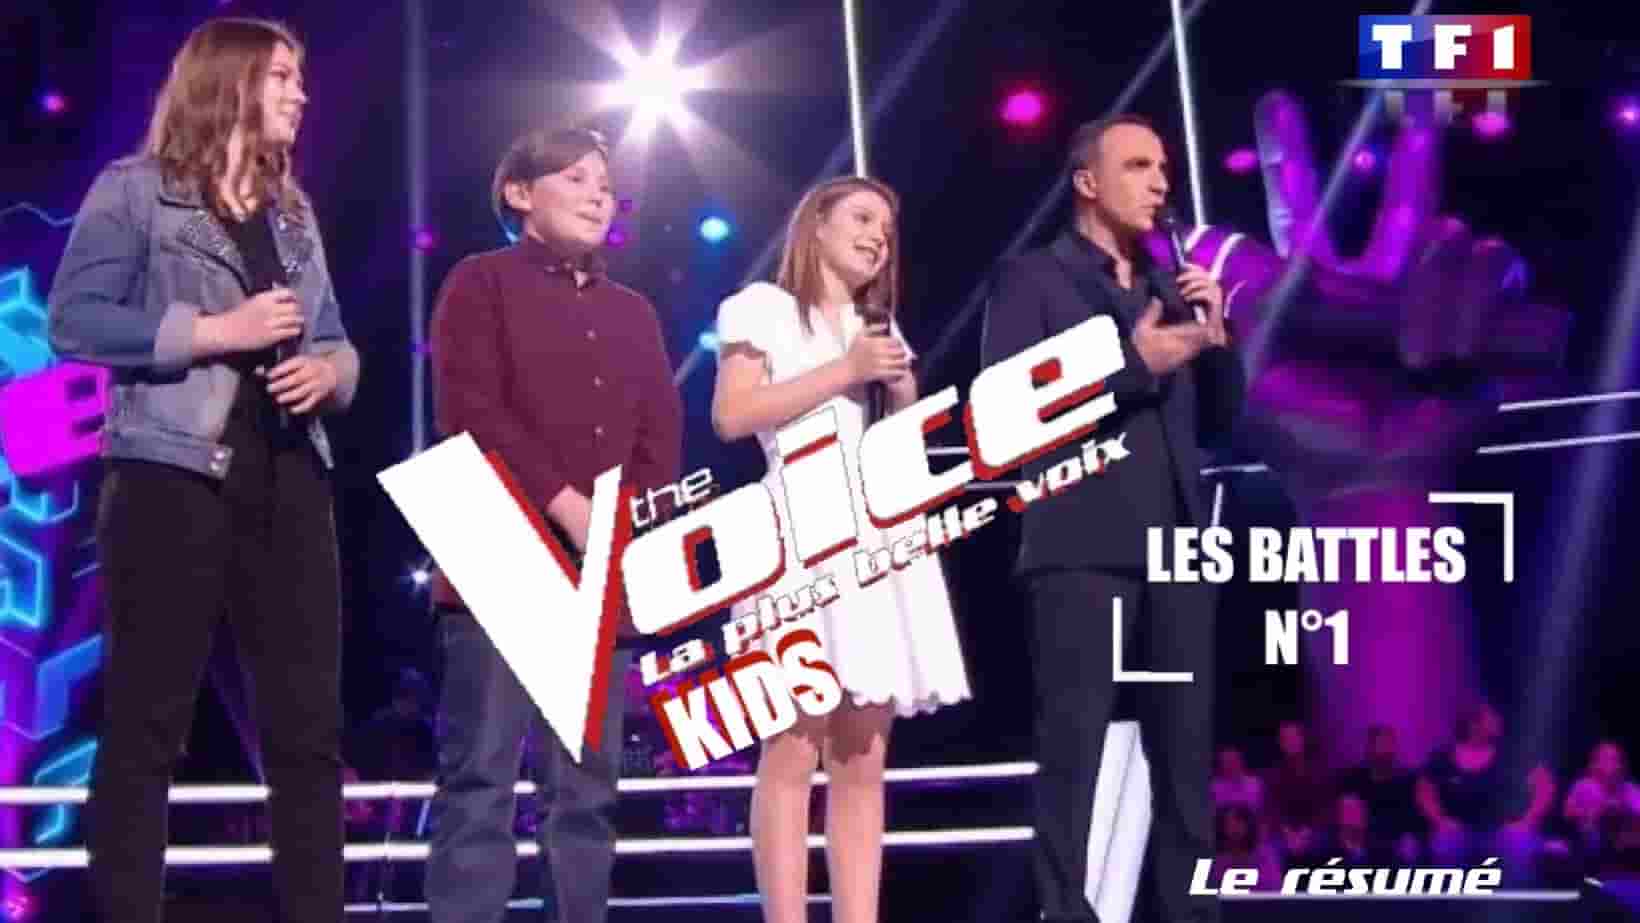 The Voice Kids 5 : Les Battles n°1 - ©/-\ll in One TV, All rights reserved. Do not copy. Reproduction Interdite